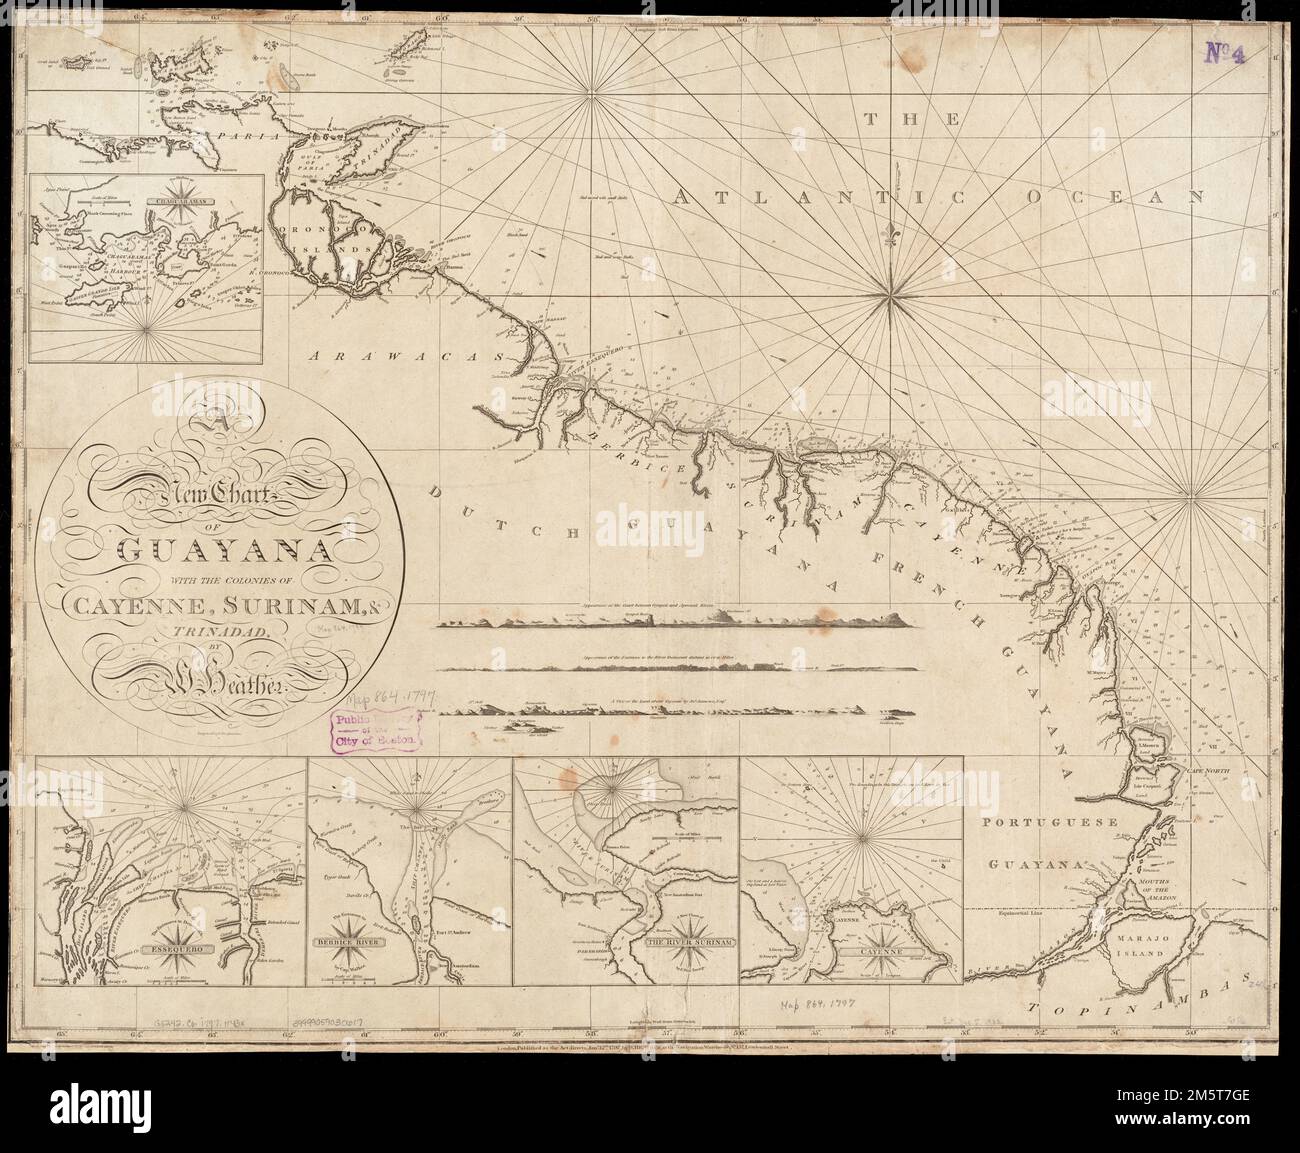 A new chart of Guyana with the colonies of Cayenne, Surinam, & Trinadad. Relief shown by hachures. Depths shown by soundings. Engraved by J. Stephenson. Insets: Chaguaramas; Essequebo; Berbice River; The River Surinam; Cayenne. includes 4 coastal views. Cataloging, conservation, and digitization made possible in part by The National Endowment for the Humanities: Exploring the human endeavor.... , Guiana  ,area  Suriname French Guiana  ,territory   , Cayenne Trinidad and Tobago  , Trinidad  ,island Stock Photo